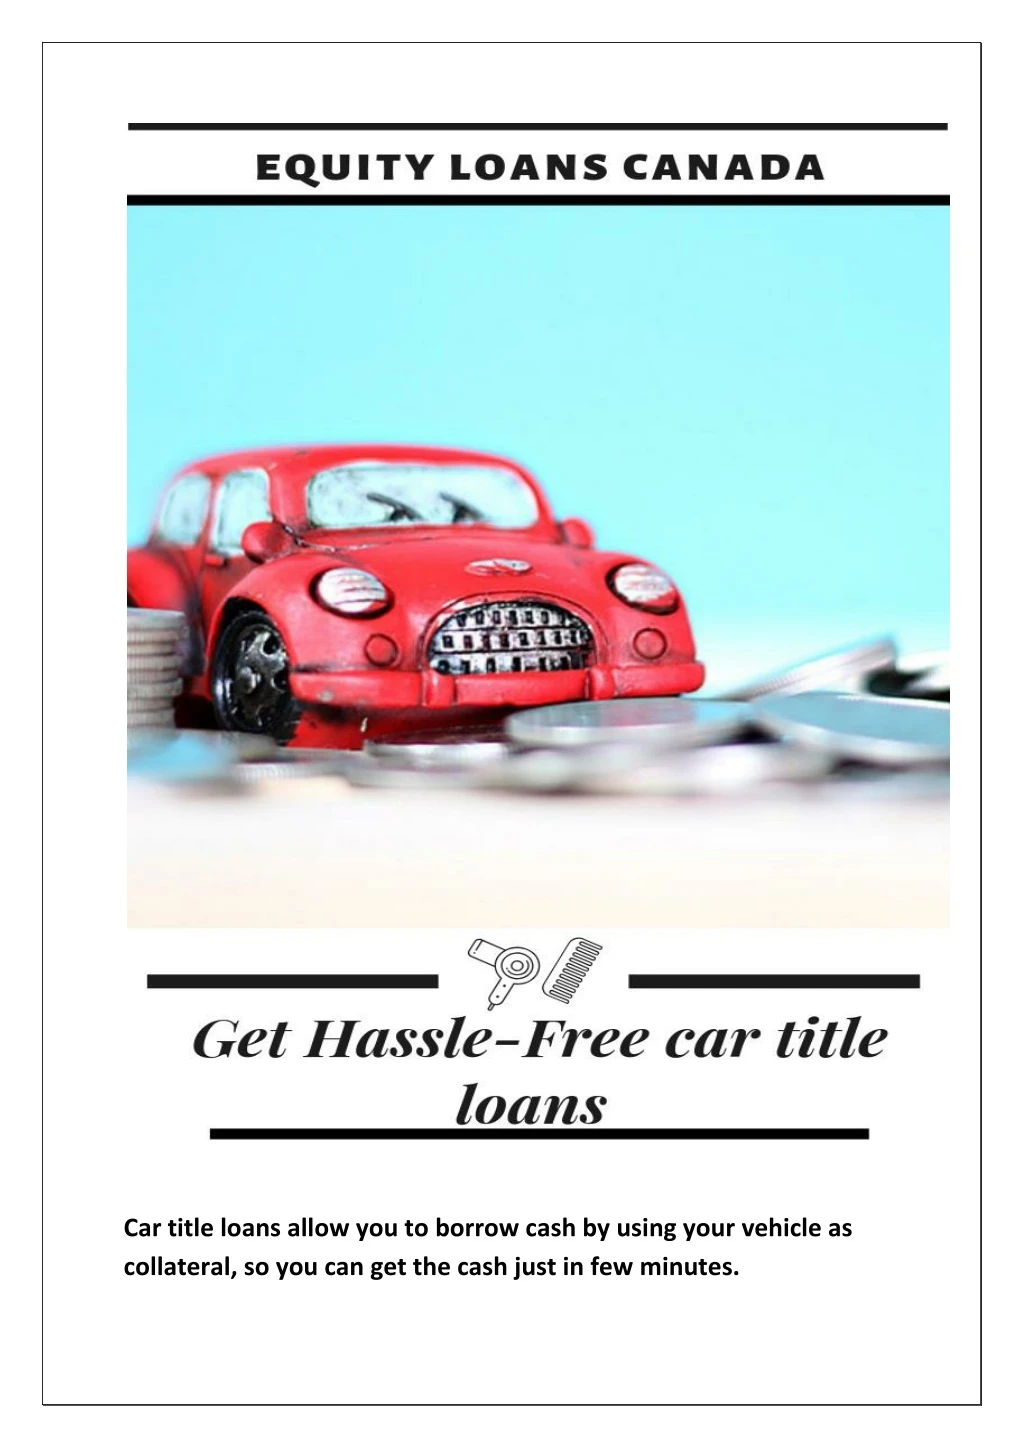 car title loans allow you to borrow cash by using